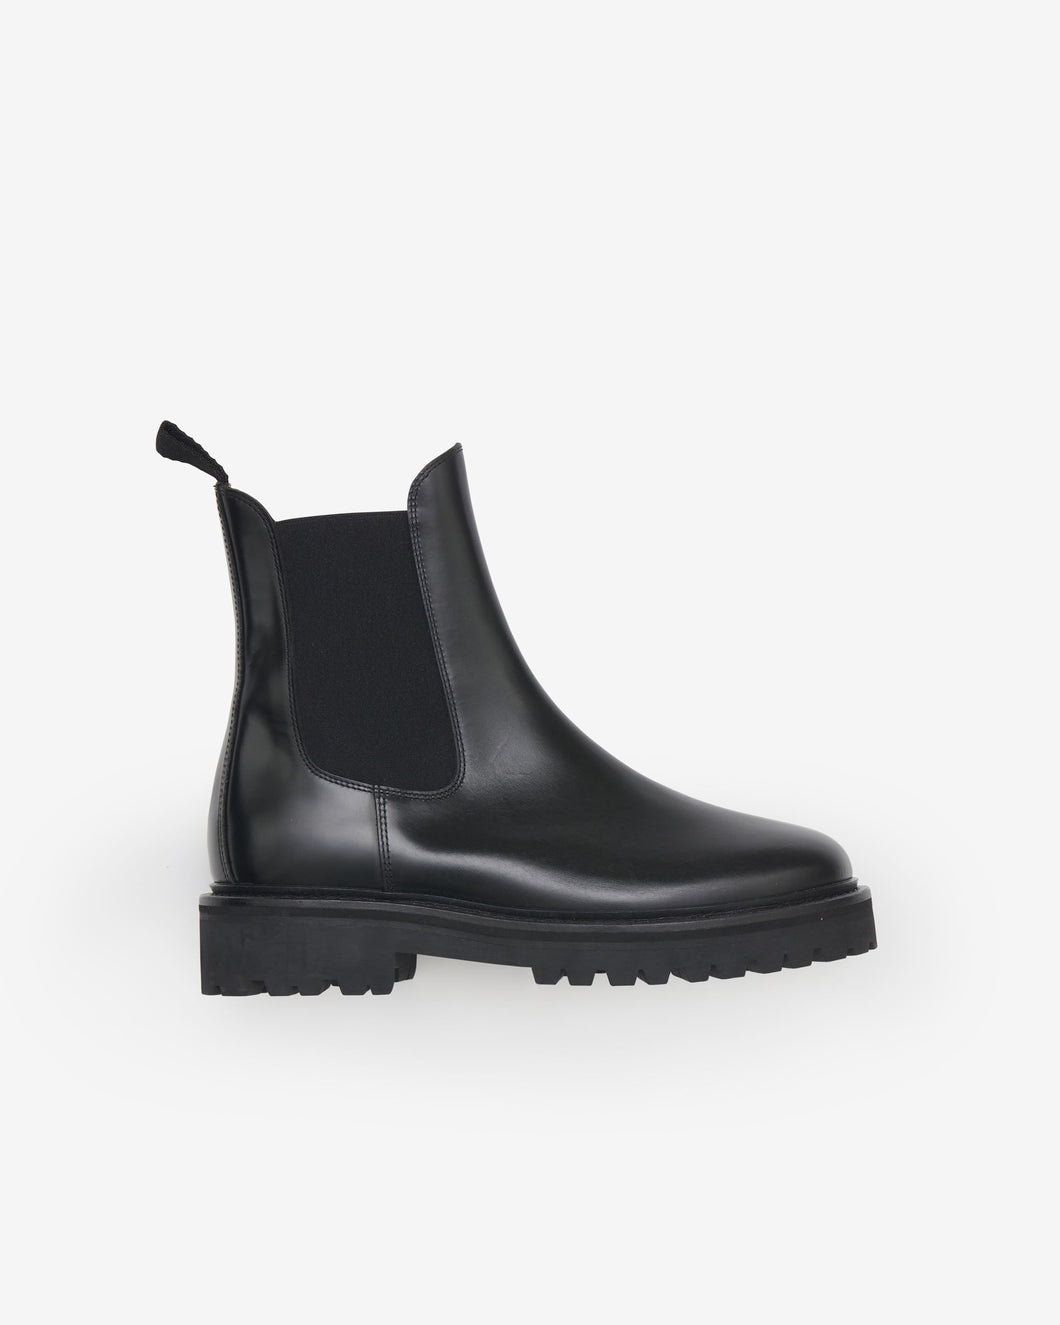 Castay Boots in Black